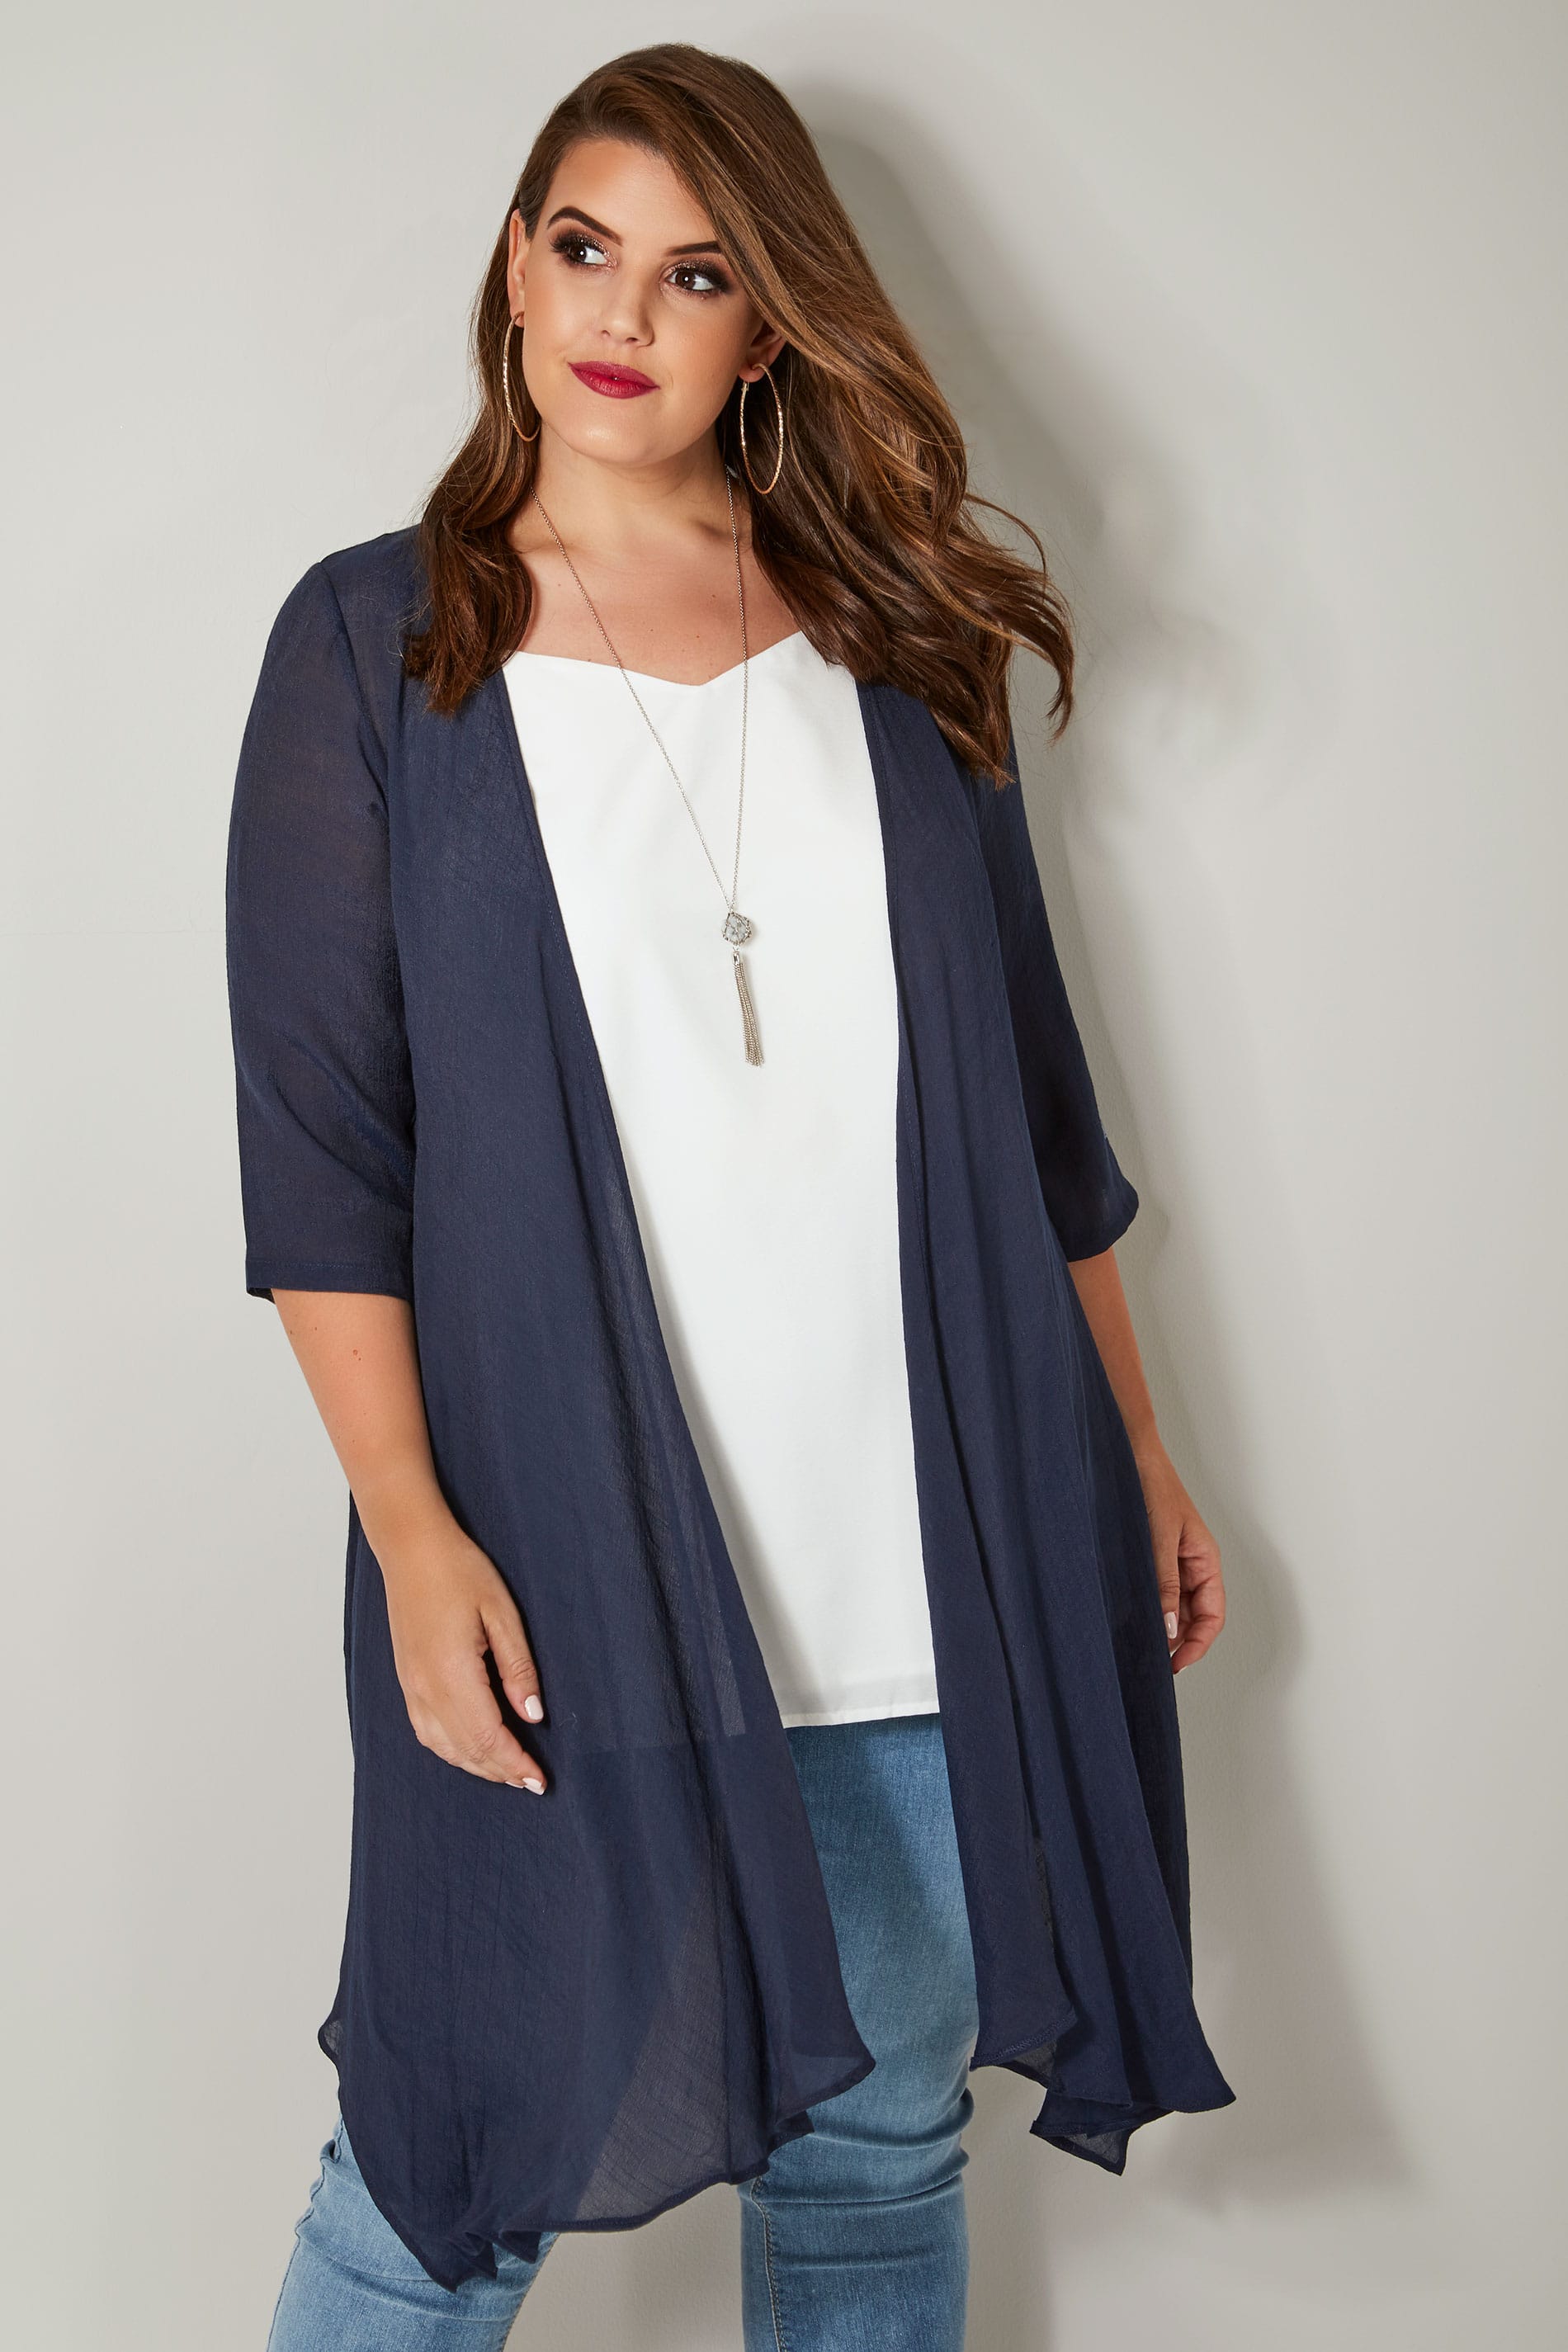 Navy Woven Cardigan With Waterfall Front, Plus size 16 to 36